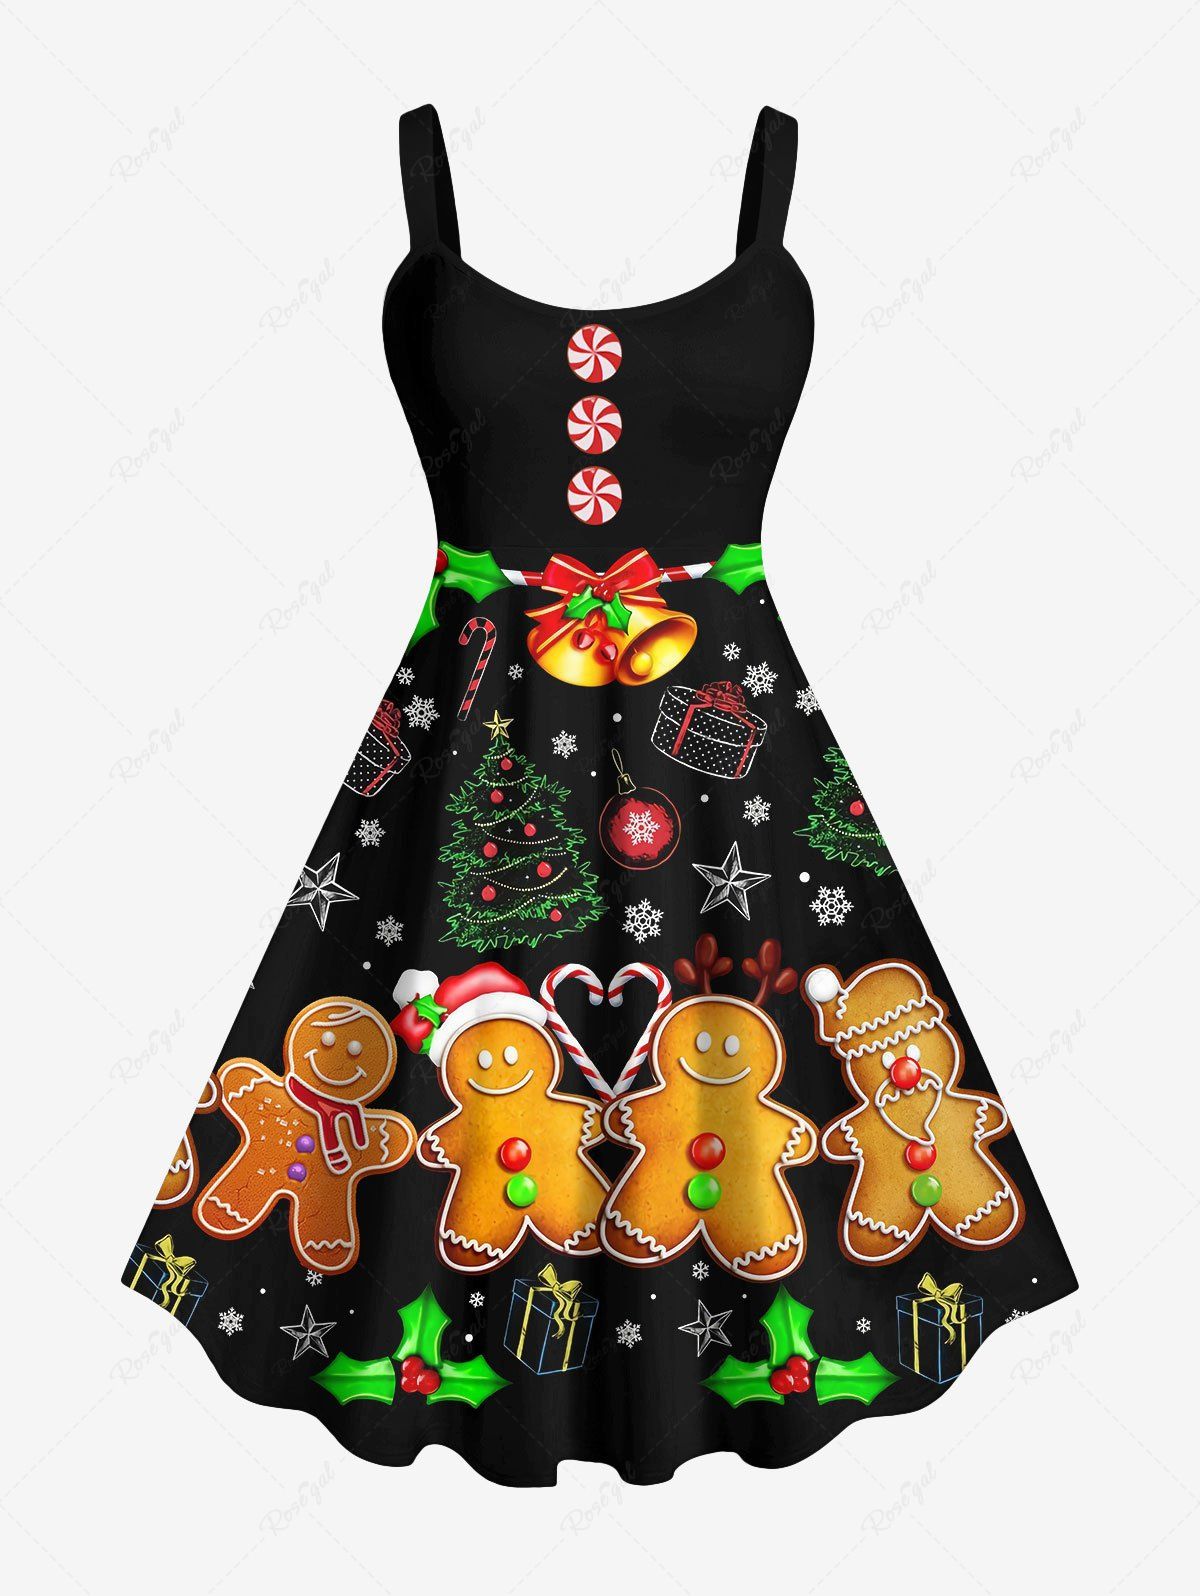 Fashion Plus Size Christmas Tree Bell Gift Candy Star Snowflake Gingerbread Print Tank Dress  